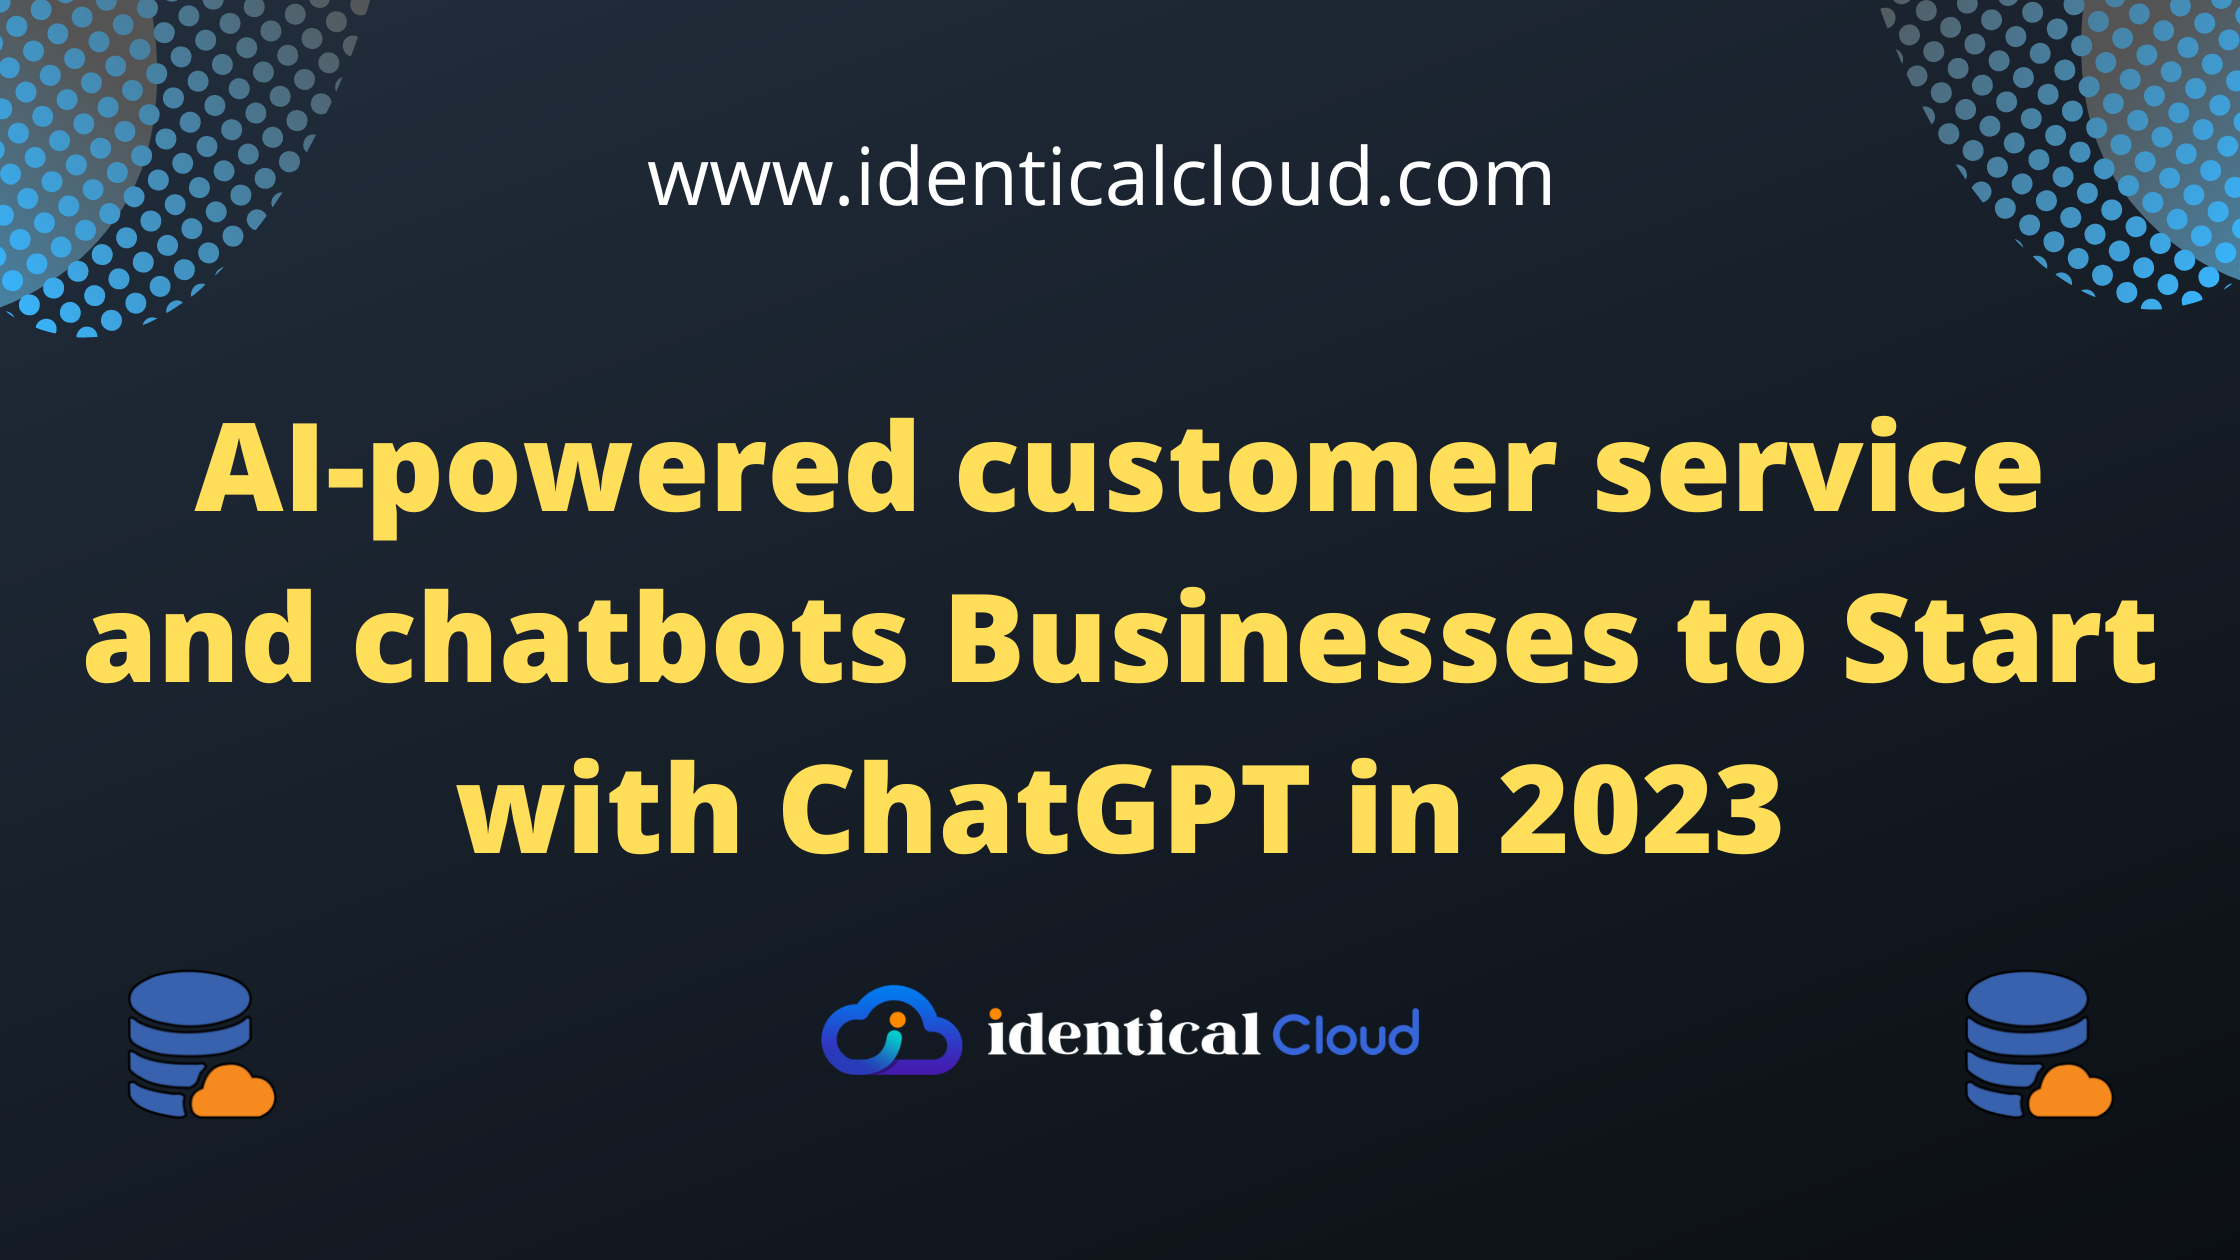 AI-powered customer service and chatbots Businesses to Start with ChatGPT in 2023 - identicalcloud.com